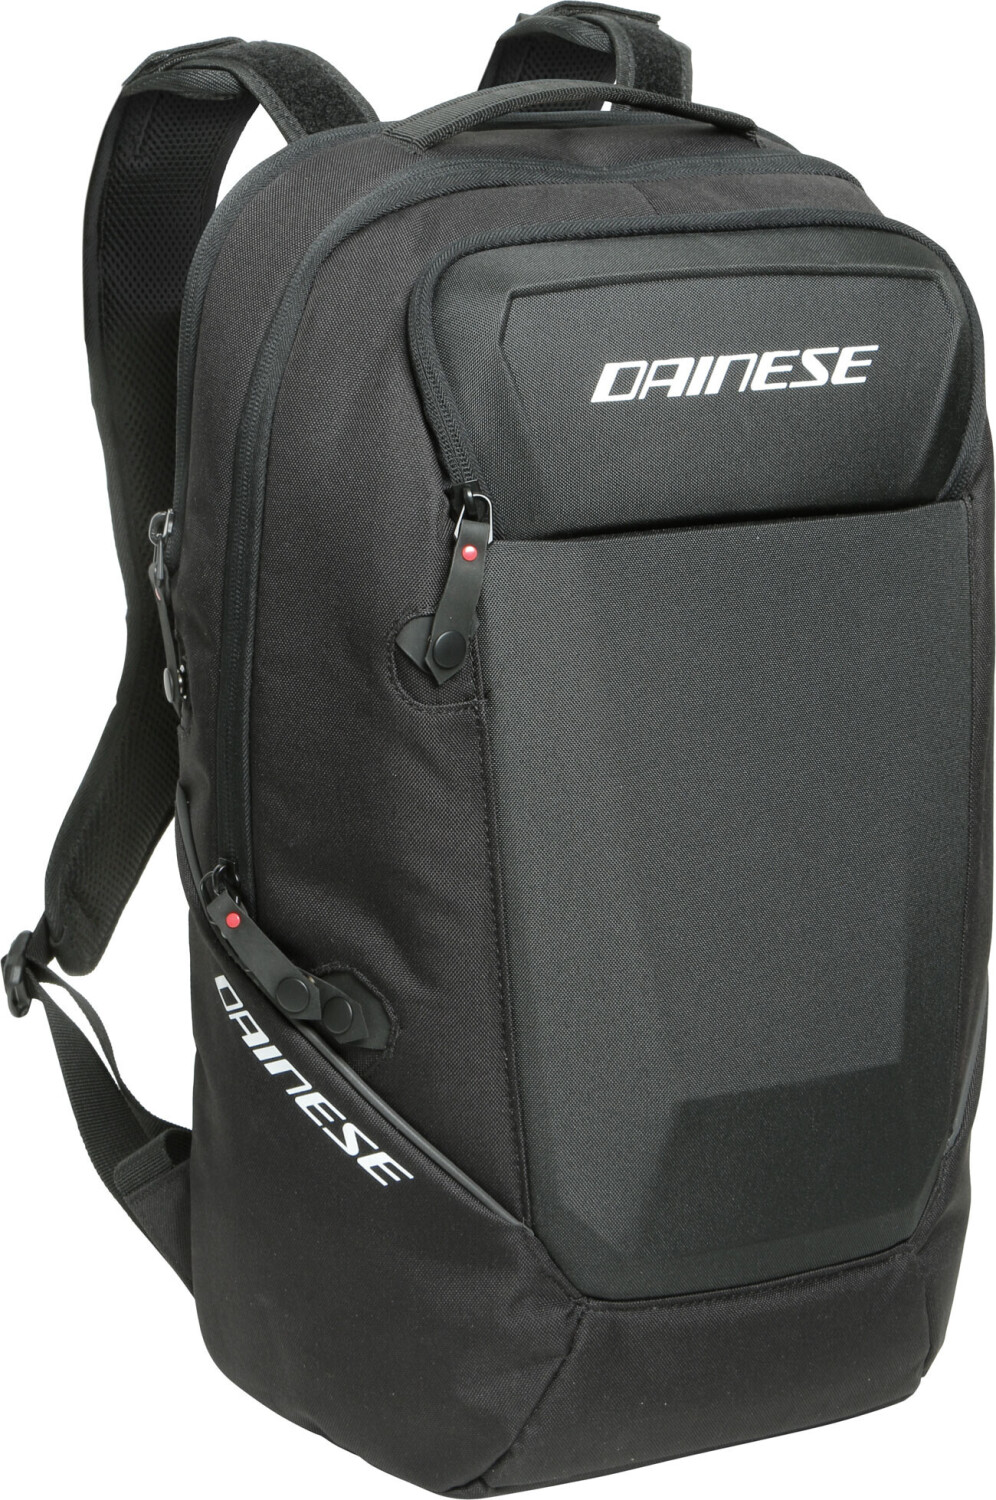 Photos - Motorcycle Luggage Dainese D-Essence Backpack 